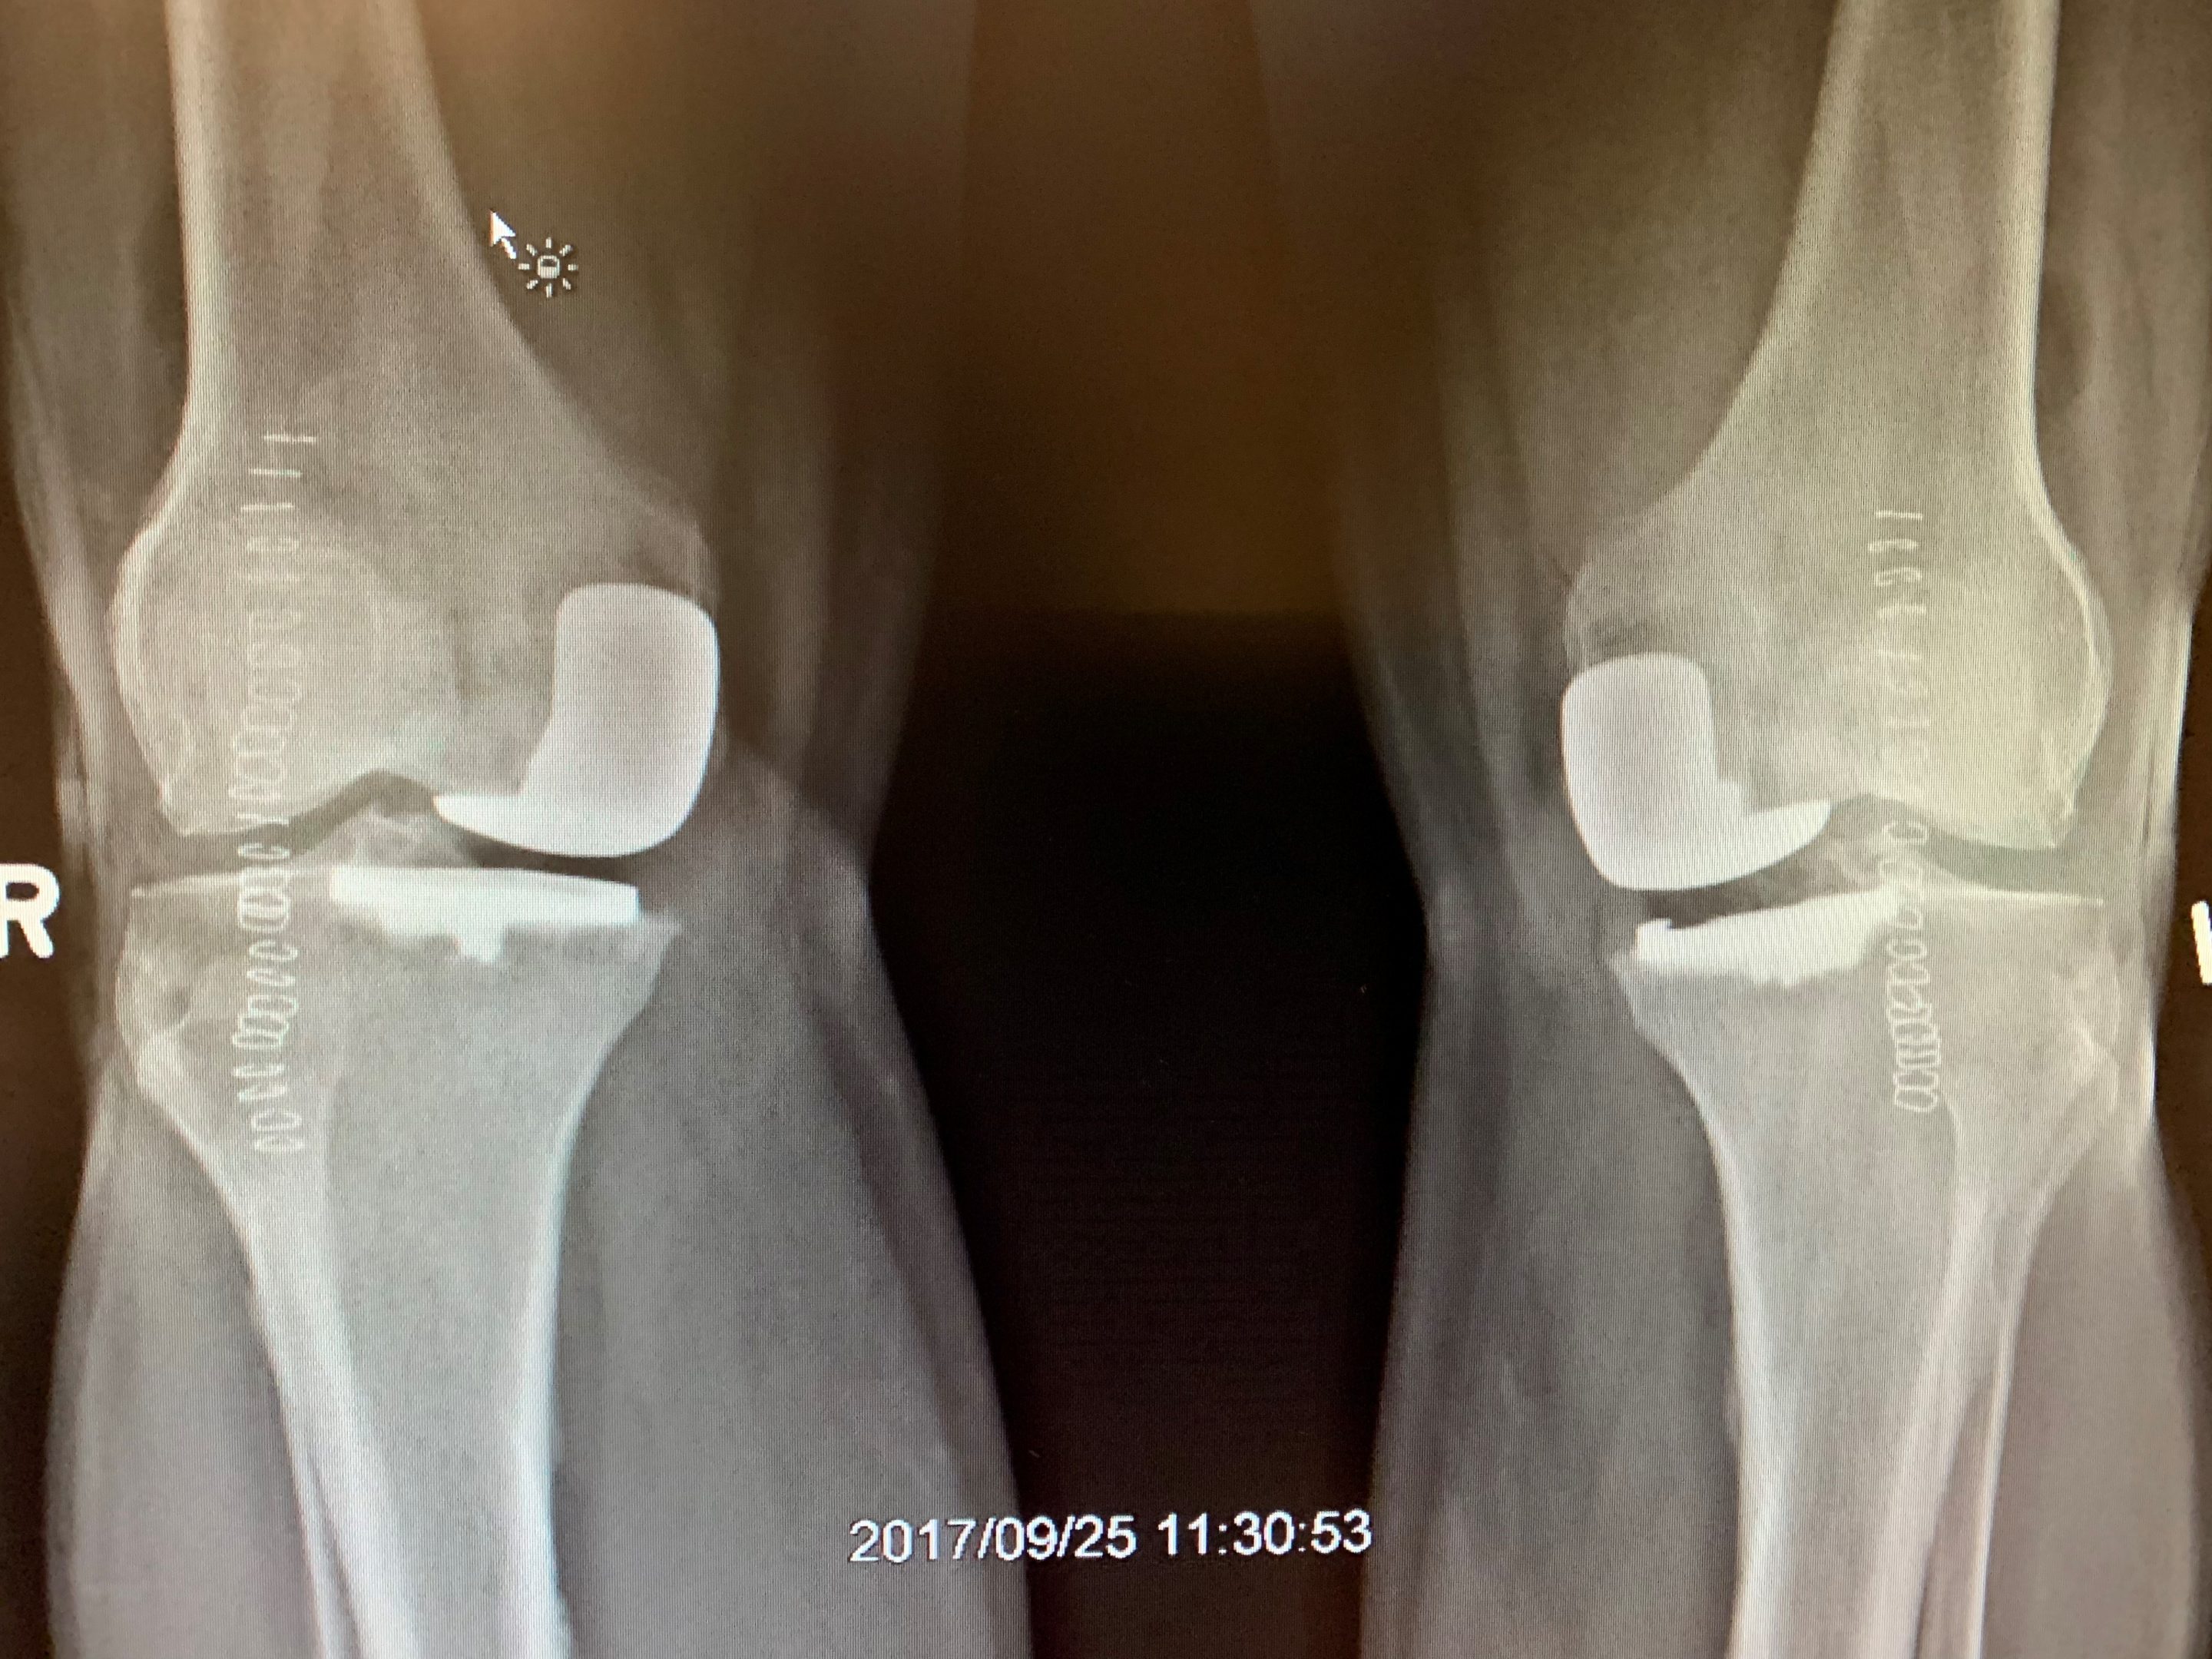 Simultaneous bilateral Unicondylar Knee replacement in 67 year old maleb